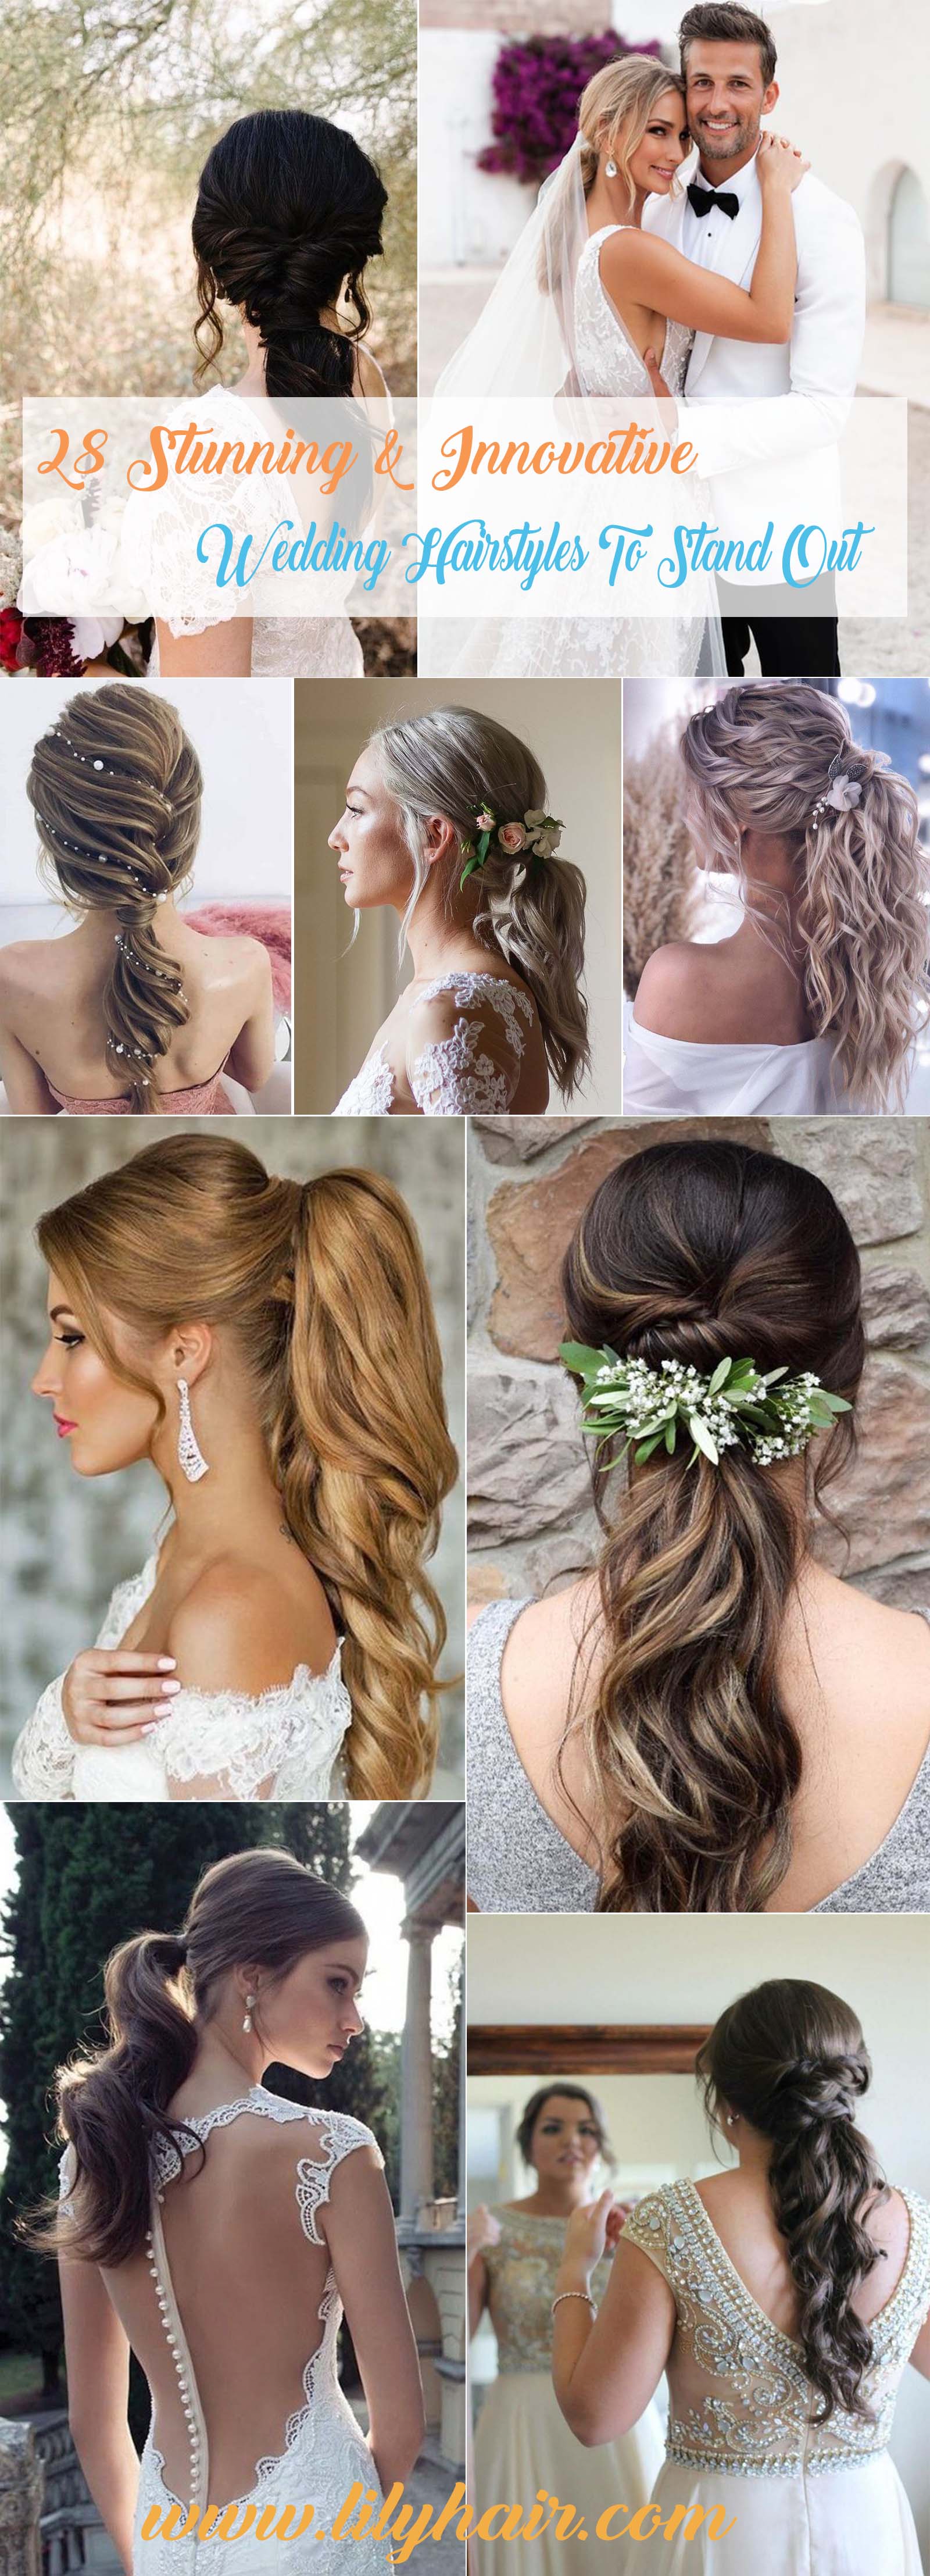 twisted and braided ponytails for bridal hairstyles
